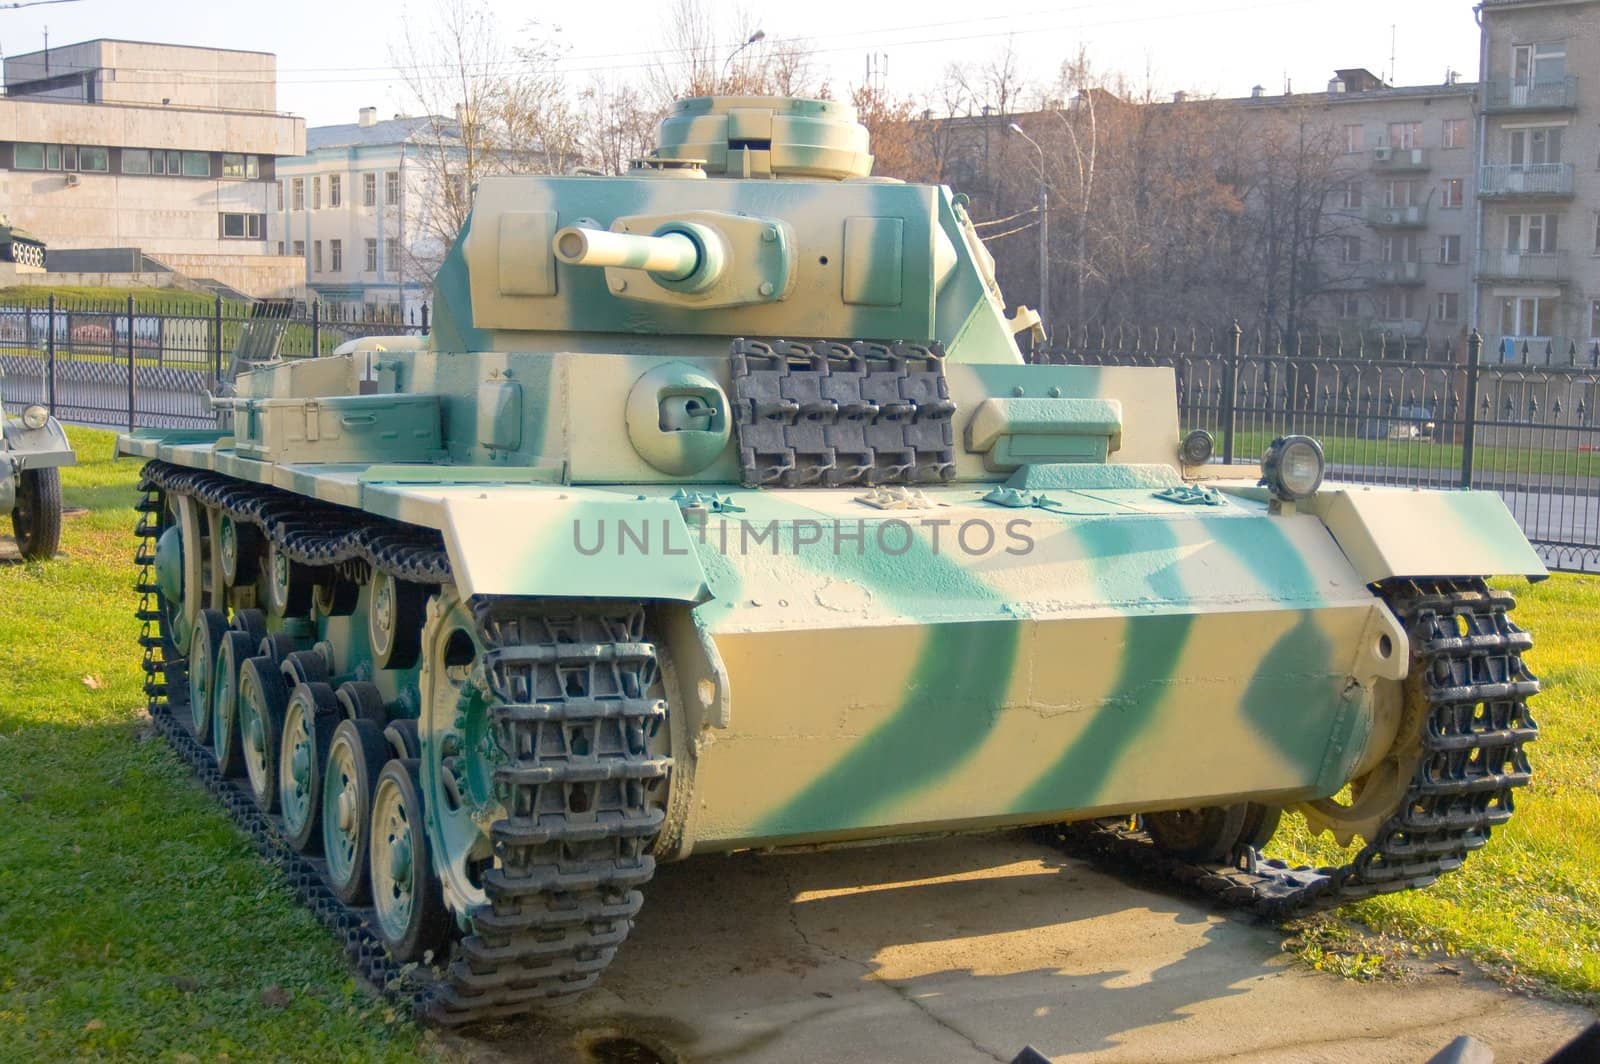 The T3 Tank Was Developed By Dimler-Benz Concern.